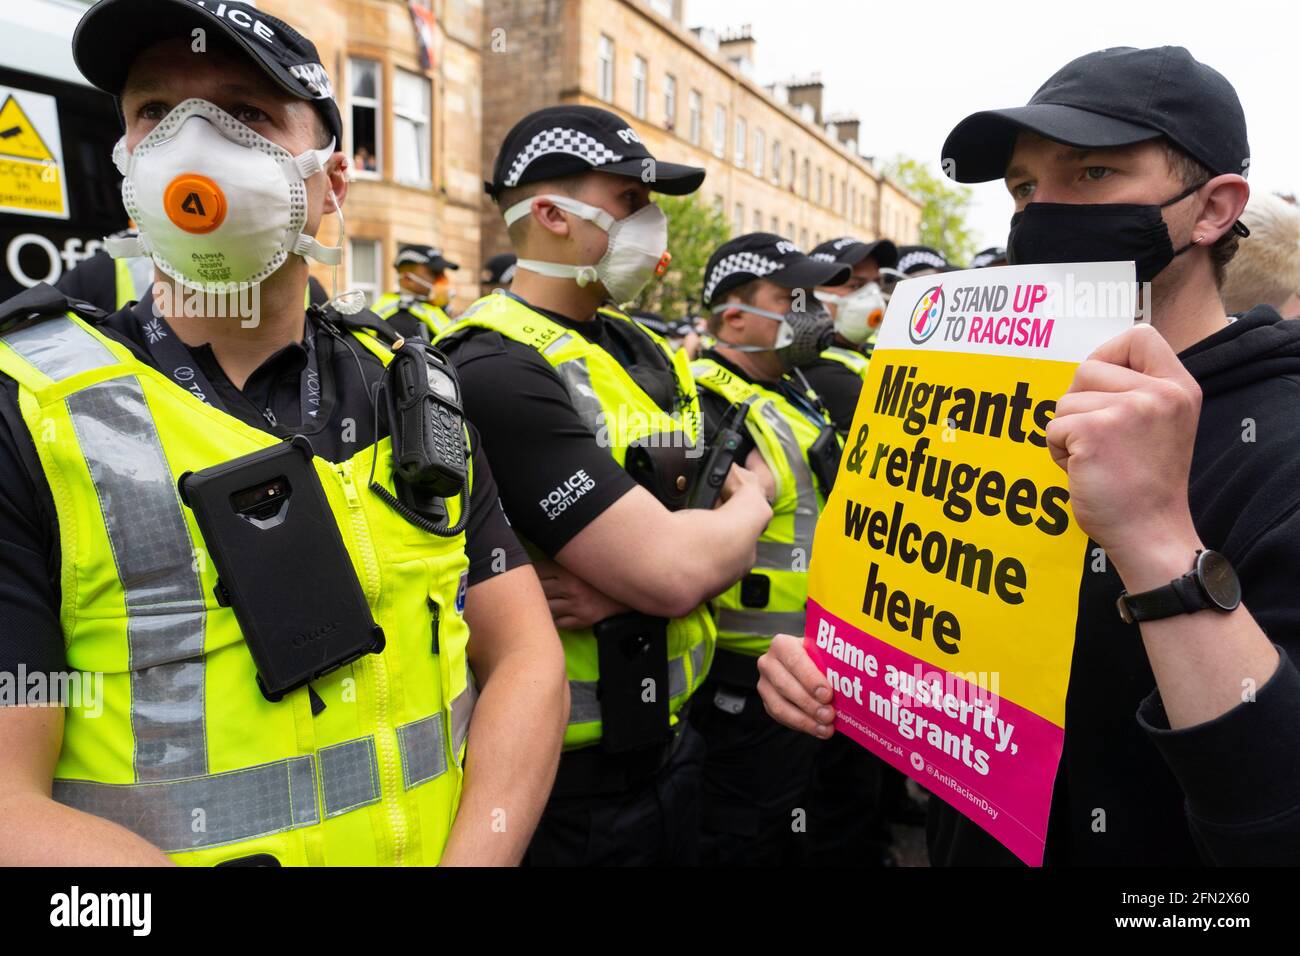 Glasgow, Scotland, UK. 13th May, 2021. At approx 5.30 pm police released two men from a Home Office detention vehicle. Accompanied by lawyer Aamer Anwar the men walked to a nearby mosque surrounded by hundreds of police and supporters who had previously been surrounding the vehicle and sitting on the street. Pic; Home Office immigration Enforcement vehicle containing two men is surrounded by protesters. Credit: Iain Masterton/Alamy Live News Stock Photo